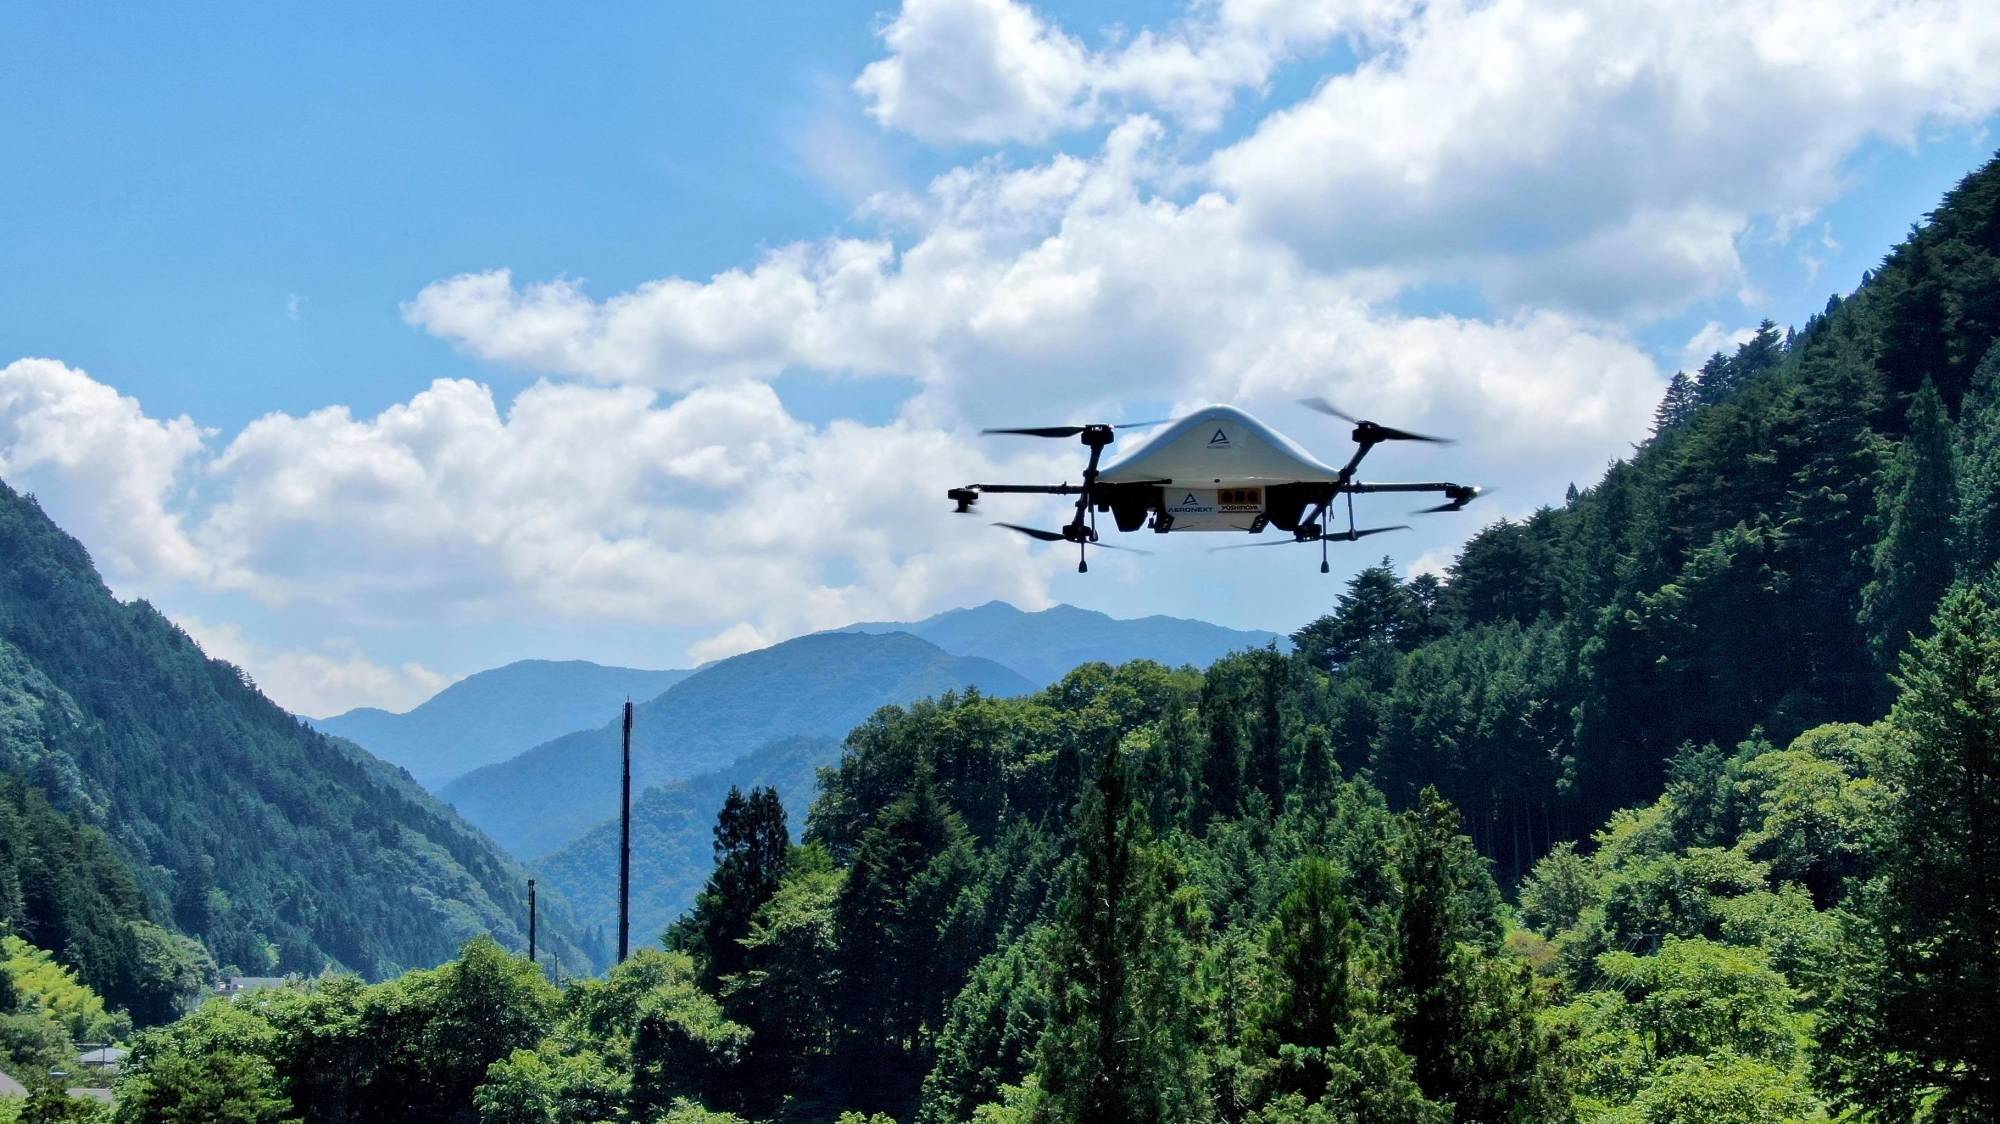 Aeronext Inc.'s drone flies over the mountains around Kosuge Village in Yamanashi Prefecture. The company hopes drone deliveries will solve the last-mile logistical conundrum many rural communities in Japan are facing. | COURTESY OF AERONEXT INC.